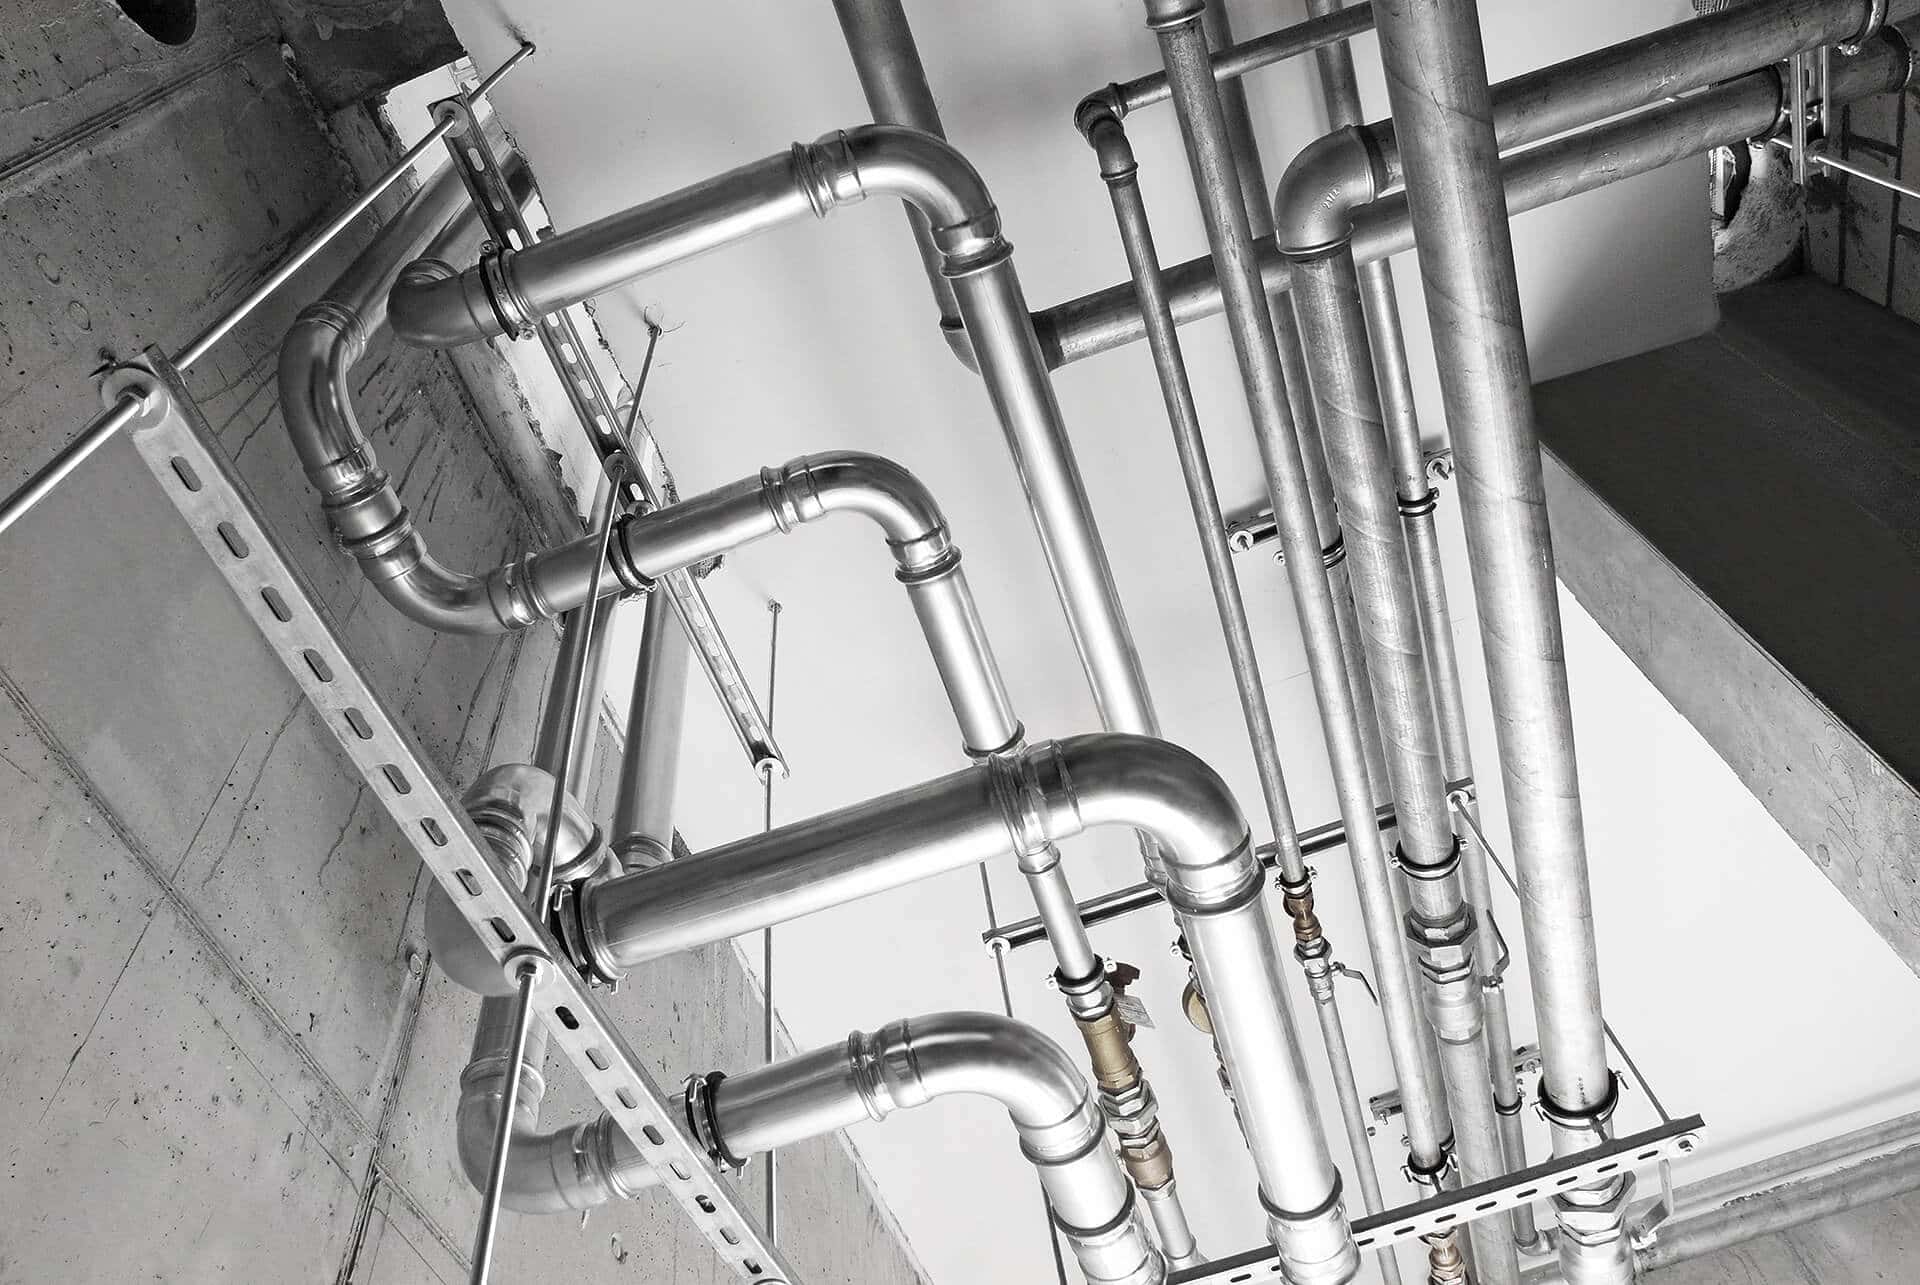 KAN-therm - Inox System - Pipes and fittings made of stainless steel.